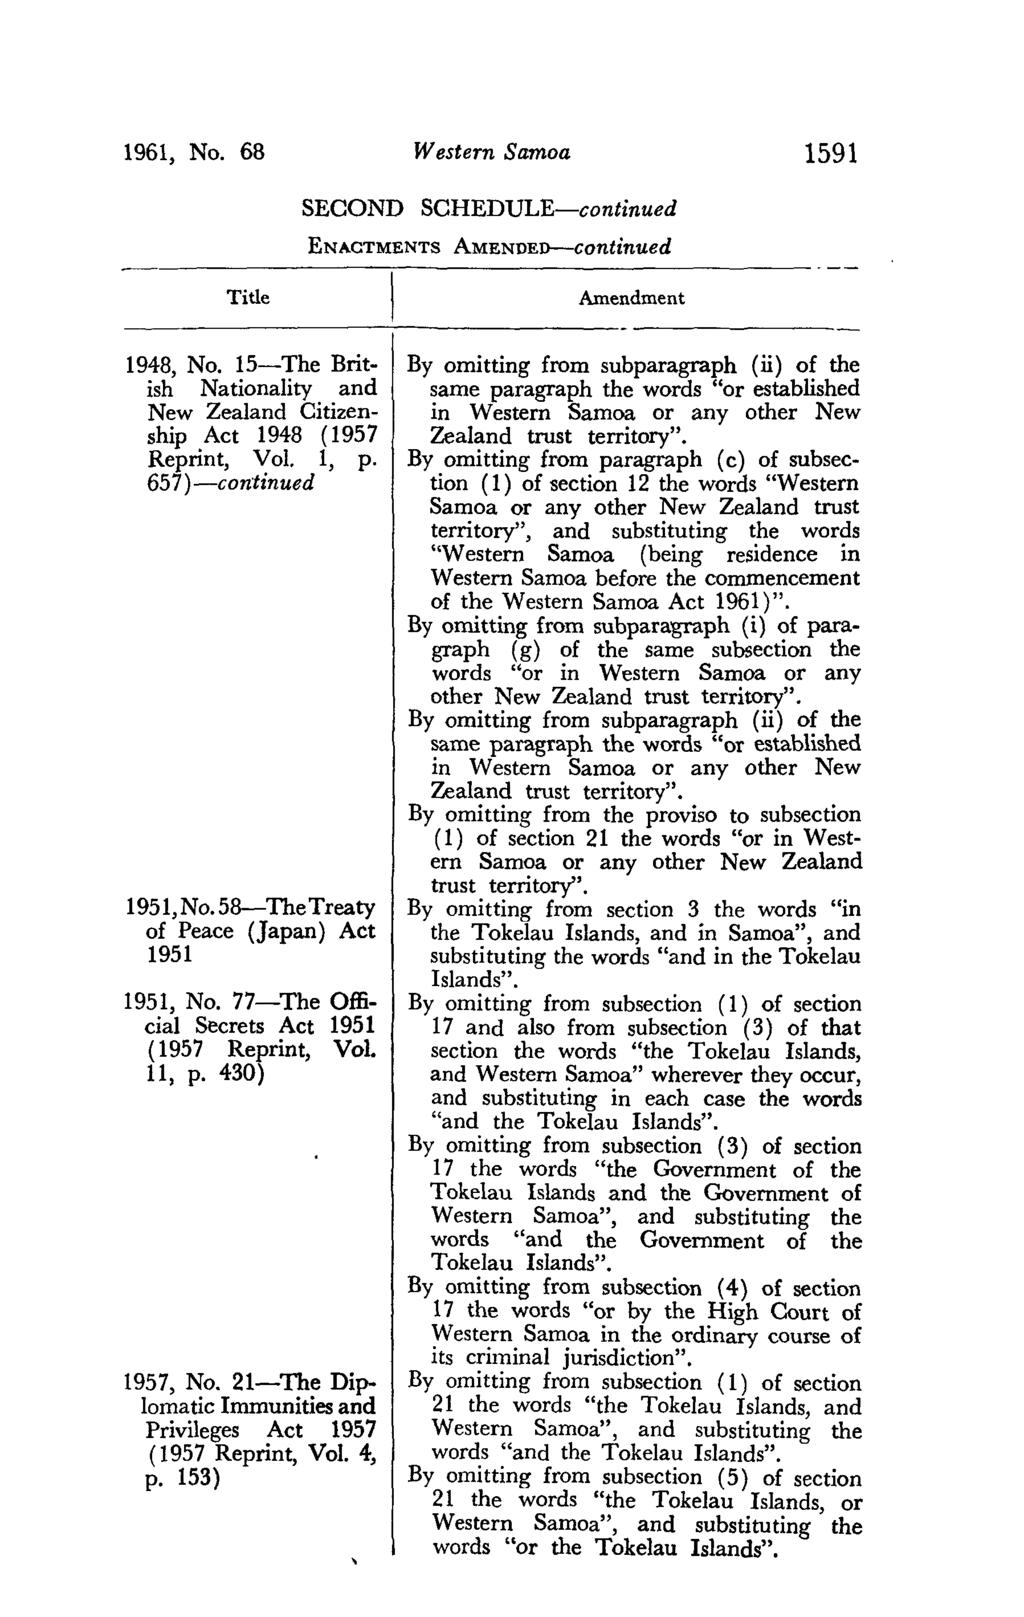 1961, No. 68 Western Samoa 1591 SECOND SCHEDULE-continued ENACTMENTS AMENDED--continued Title Amendment 1948, No. 15-The British Nationality and New Zealand Citizenship Act 1948 (1957 Reprint, Vol.